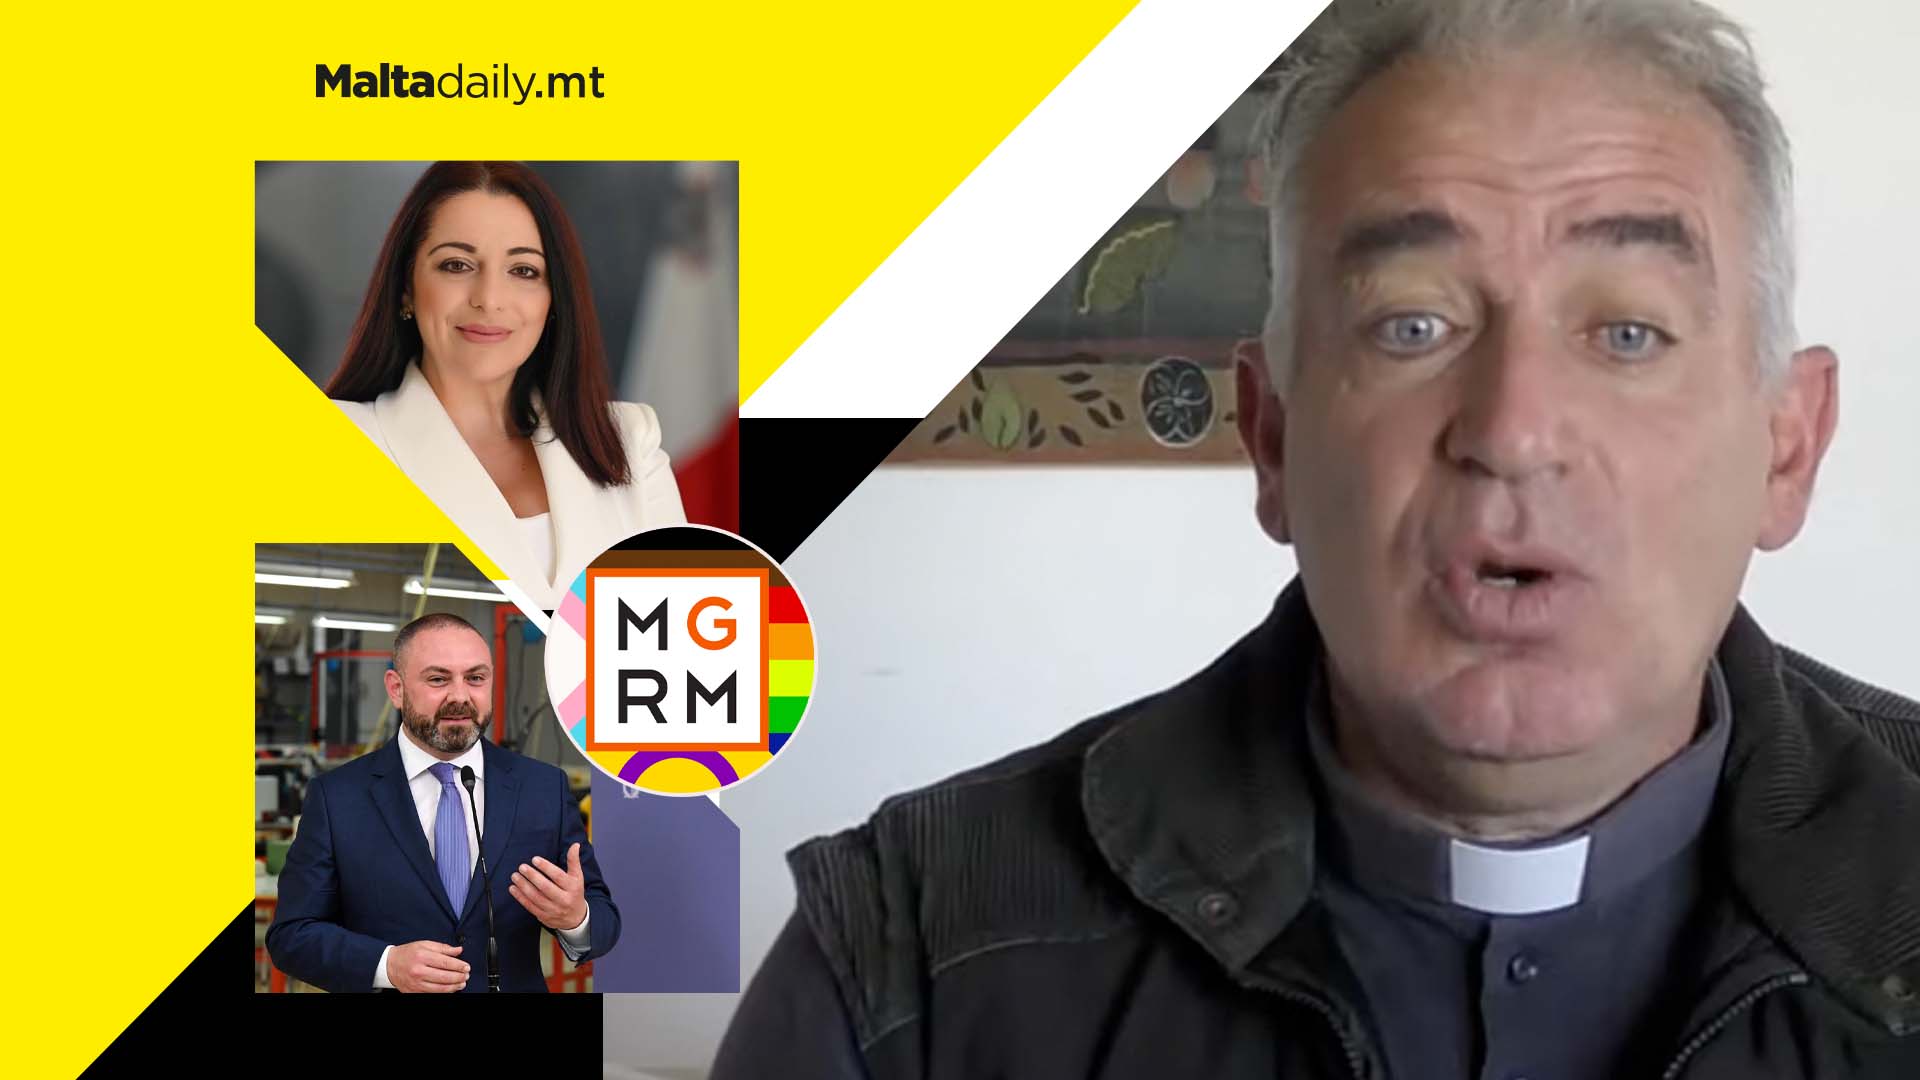 Calls for action against Mosta priest for homophobic post